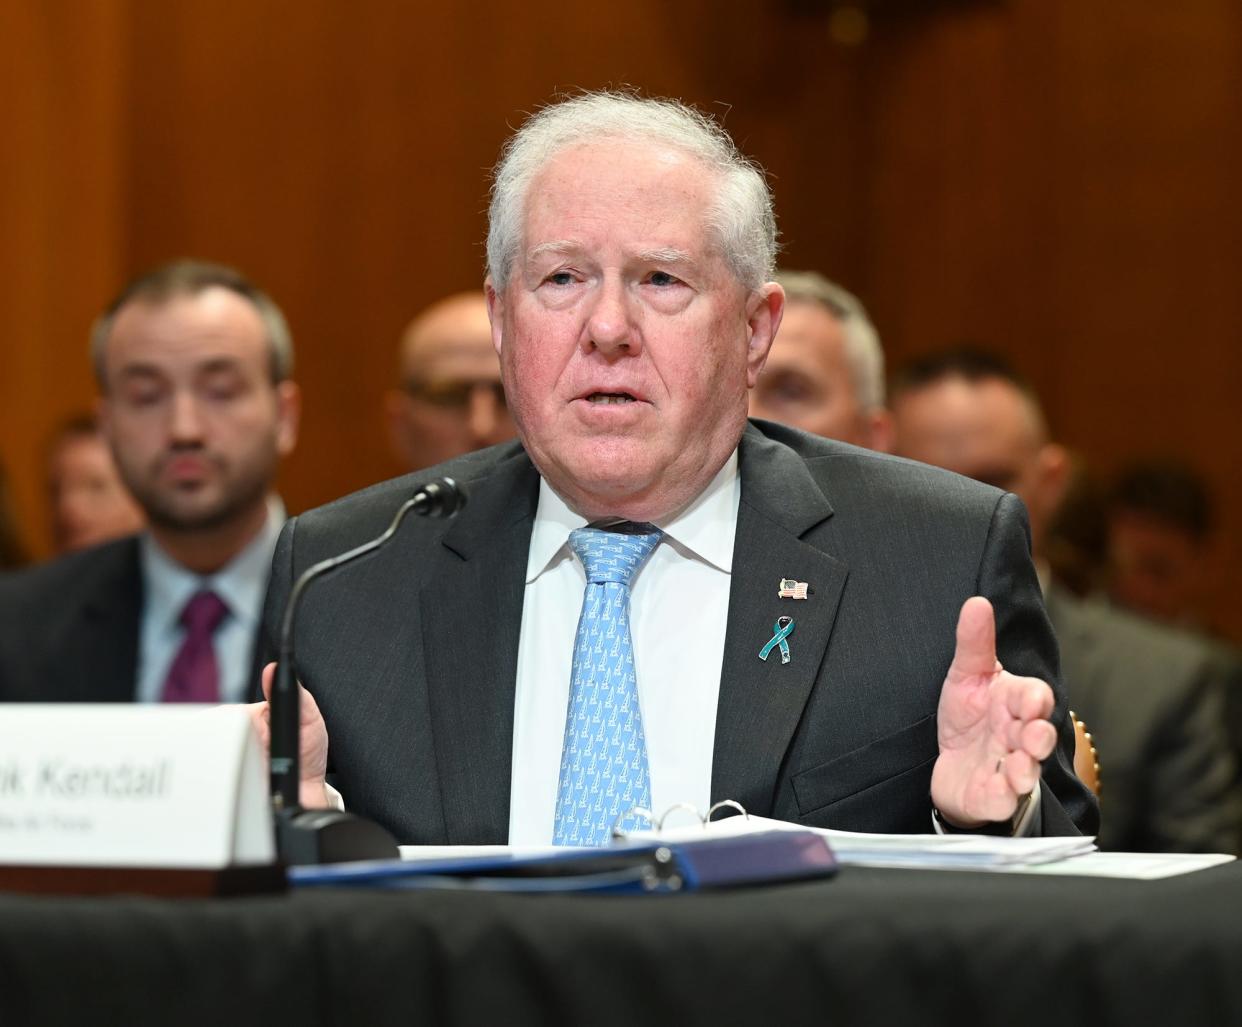 Air Force Secretary Frank Kendall defends his proposal to reassign some units of the Air National Guard to the fledgling U.S. Space Force. “We’re talking about a few hundred people," he said. "And there are only a handful of states (that) are affected.” Texas would not be affected by the move.